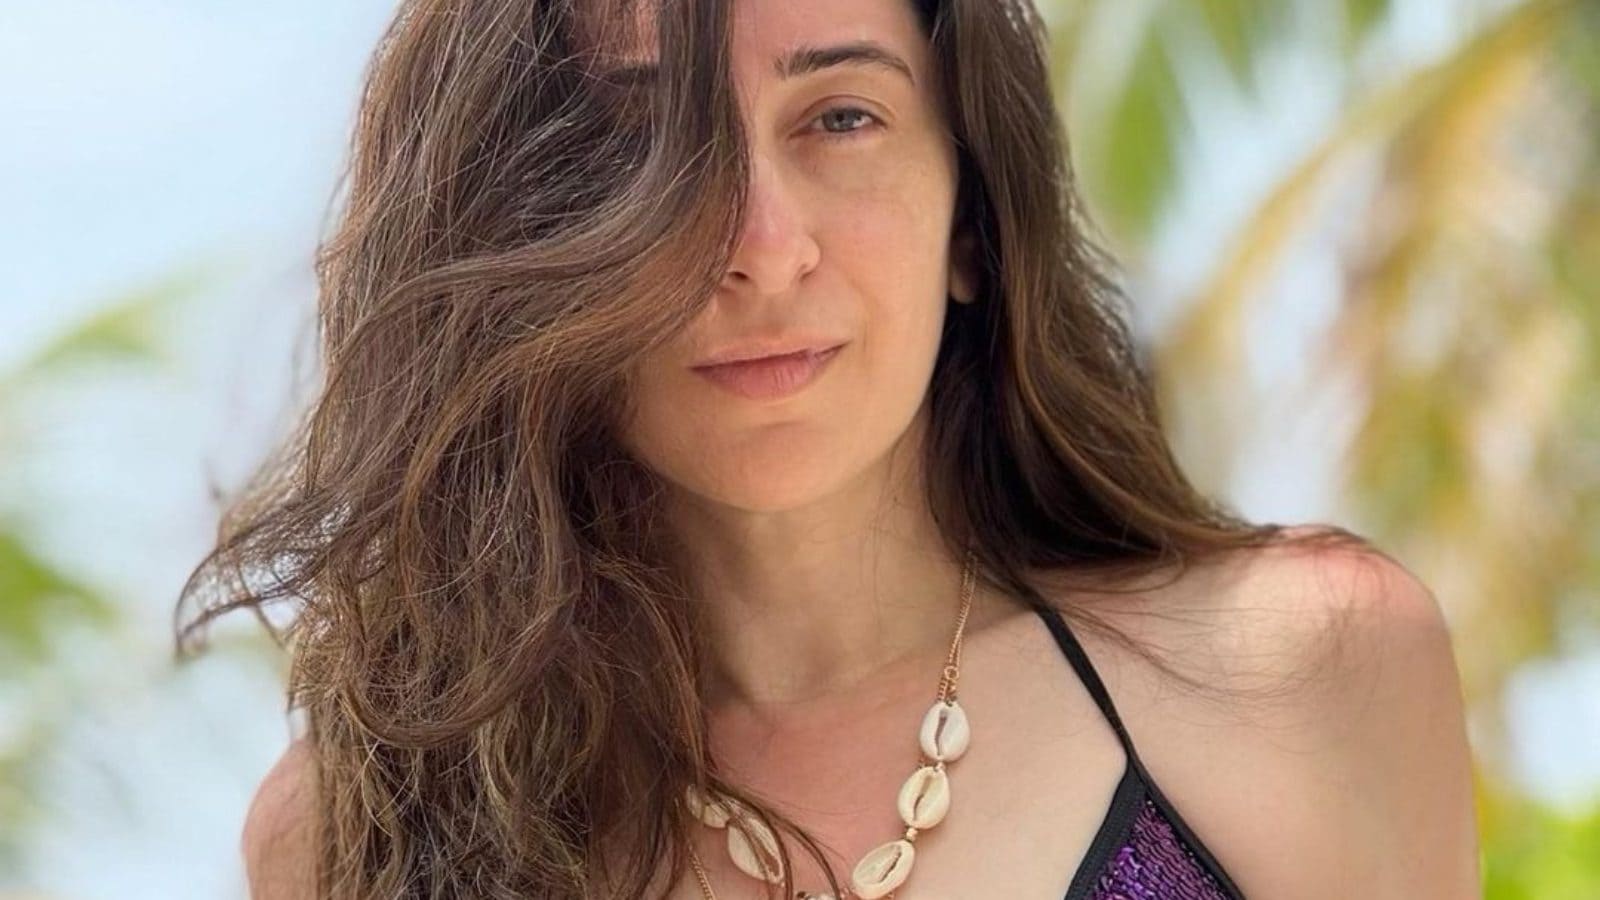 Original Karishma Kapoor Xxx - Karisma Kapoor Reminds Age Is Just a Number with Her Latest Sexy Pic, Says  'I Sea You' - News18